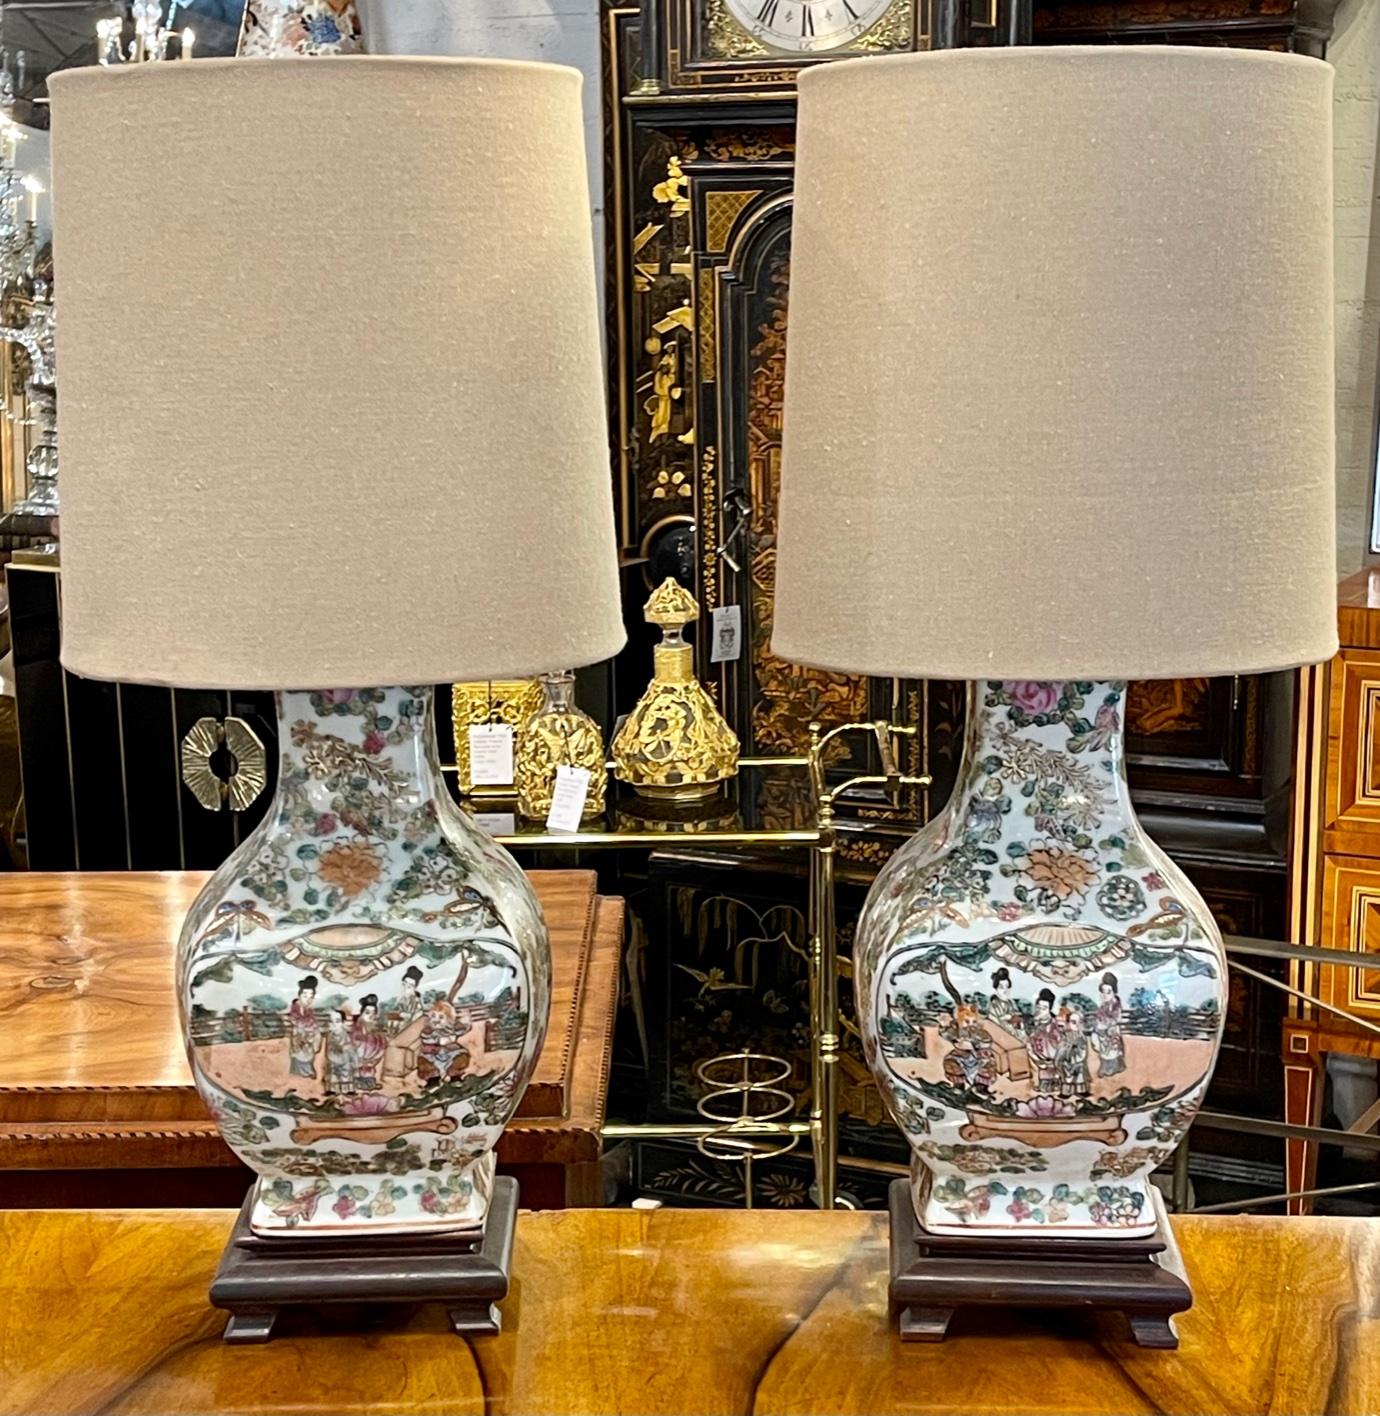 Pair of antique Chinese Rose Mandarin vases mounted as lamps. Circa 1870. A timeless and classic touch for a fine interior.